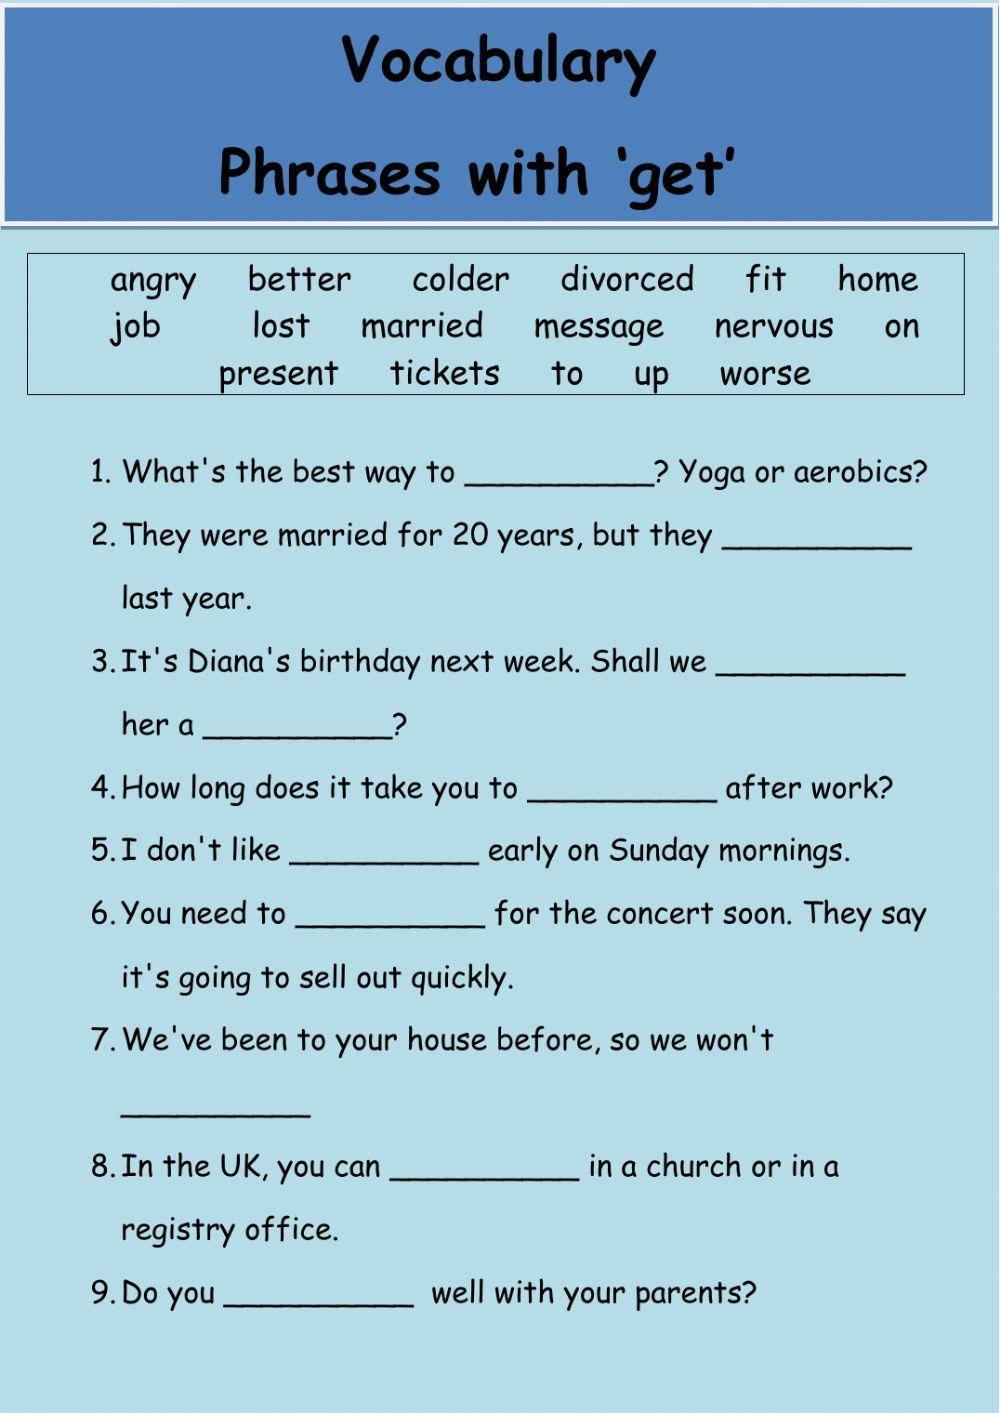 Phrases with 'get'